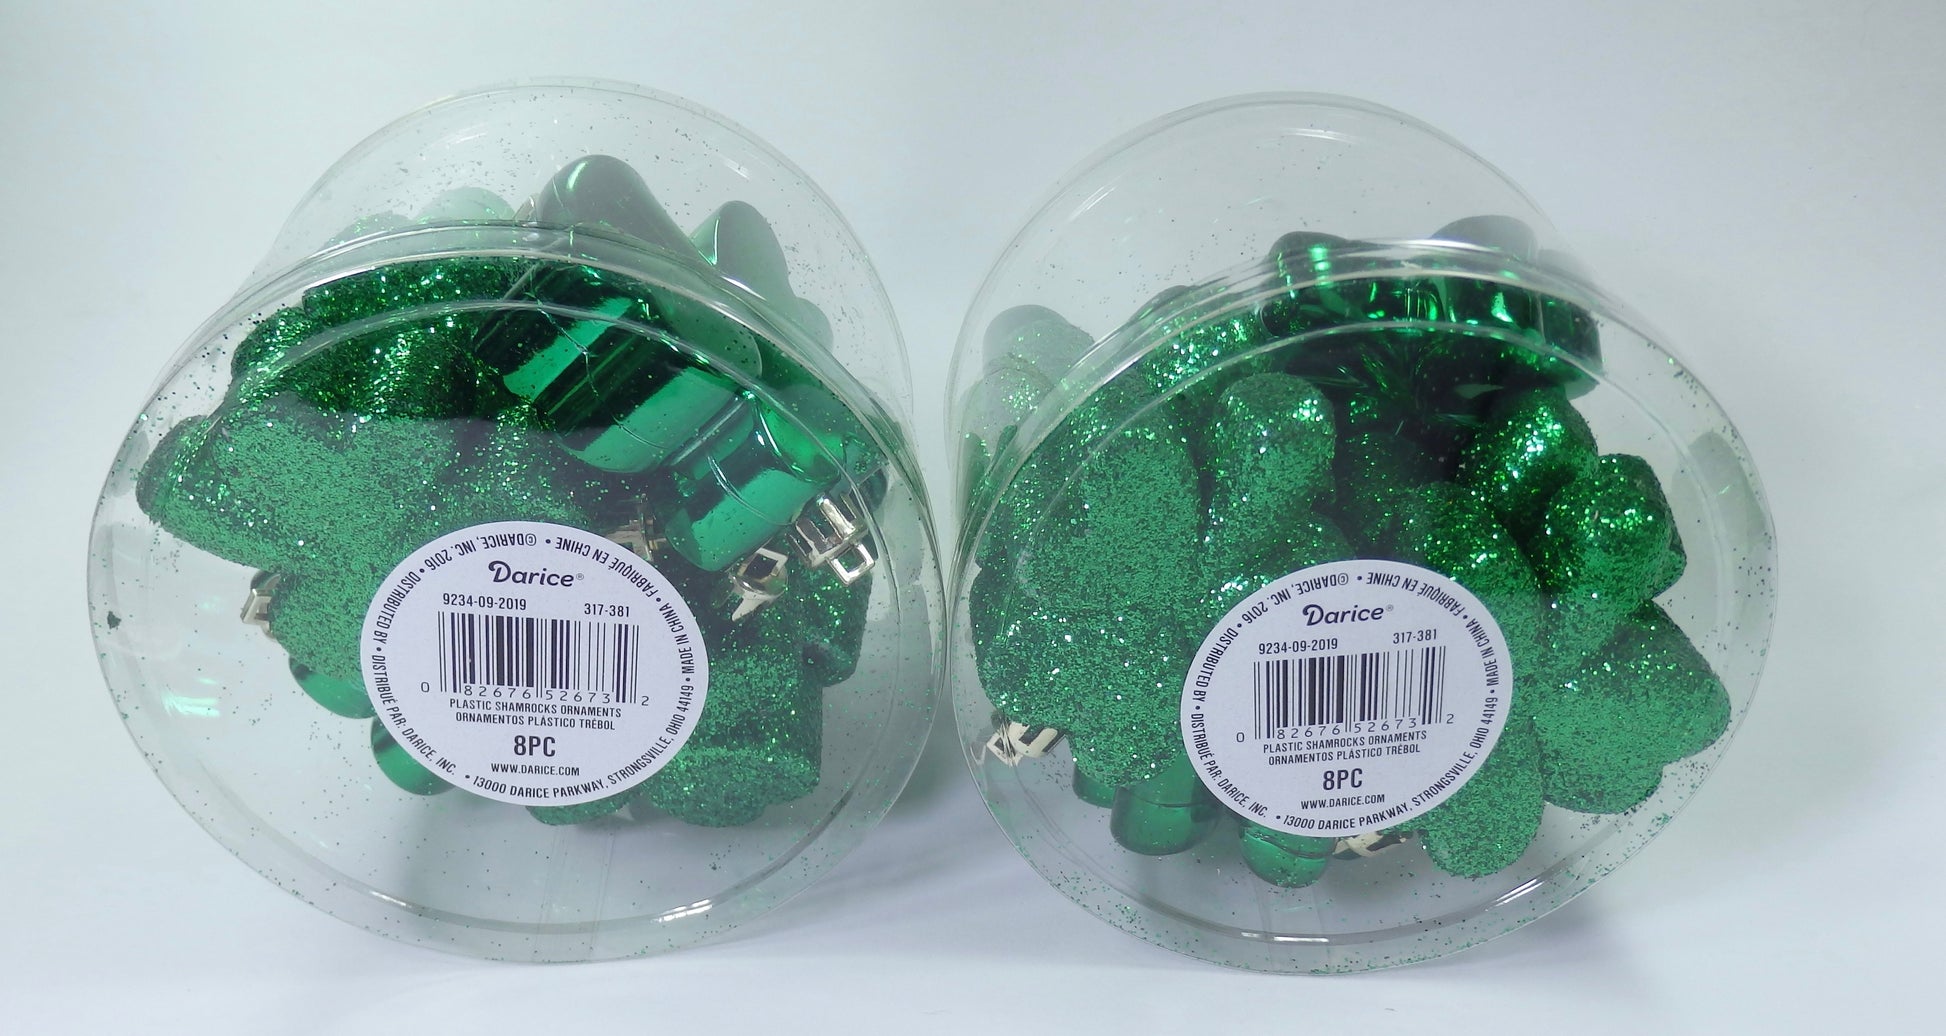 Darice Shamrock Ornaments Set of 16-Oakview Collectibles